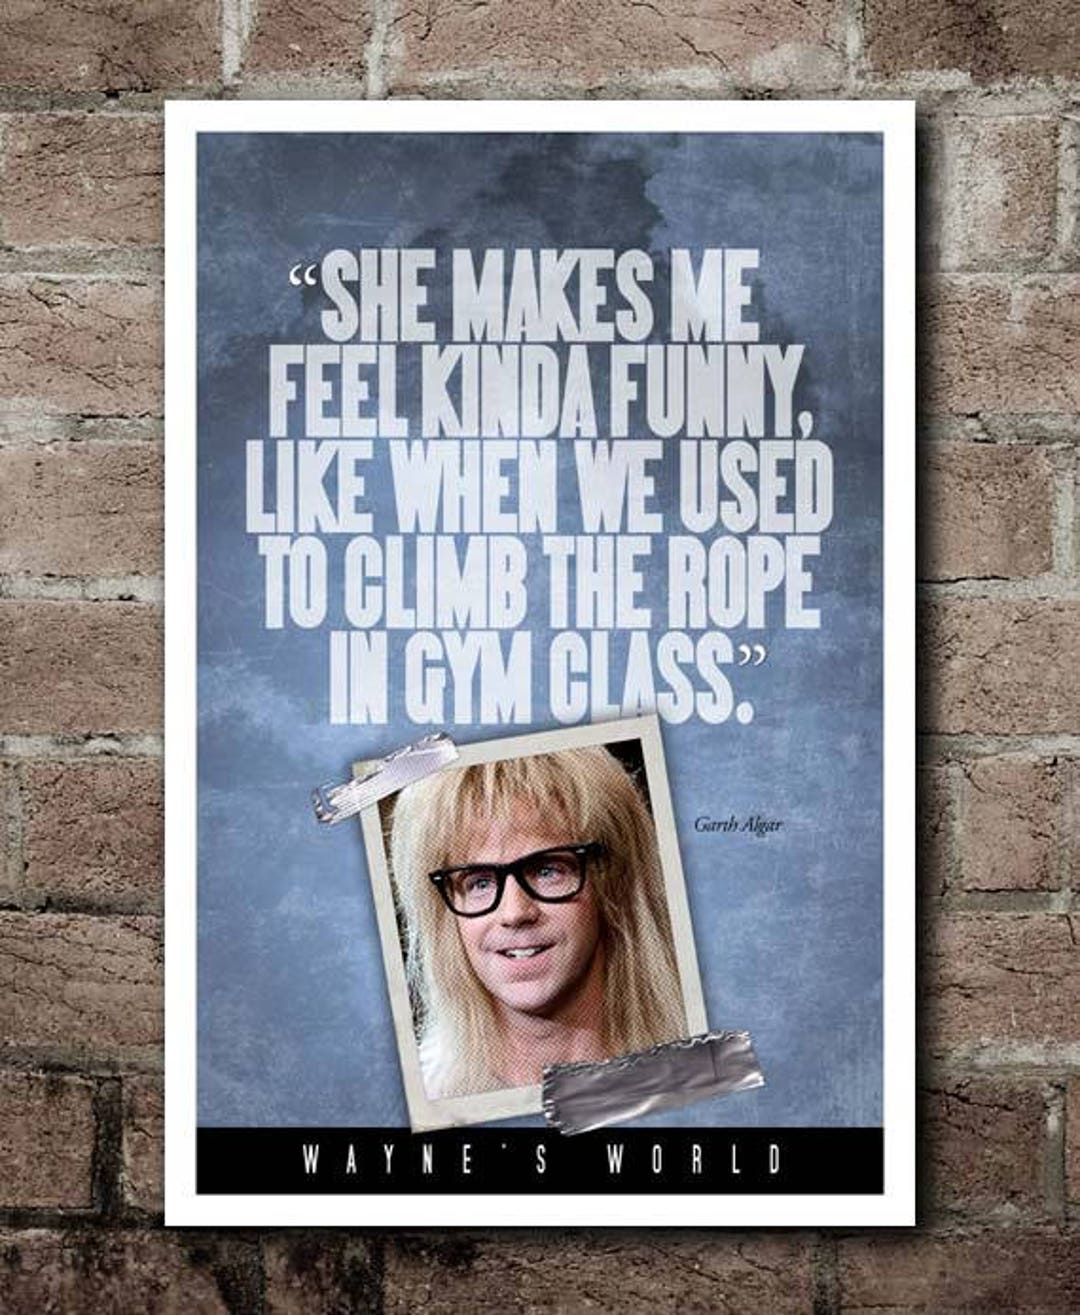 Wayne's World's Best Quotes That You Probably Say All the Time